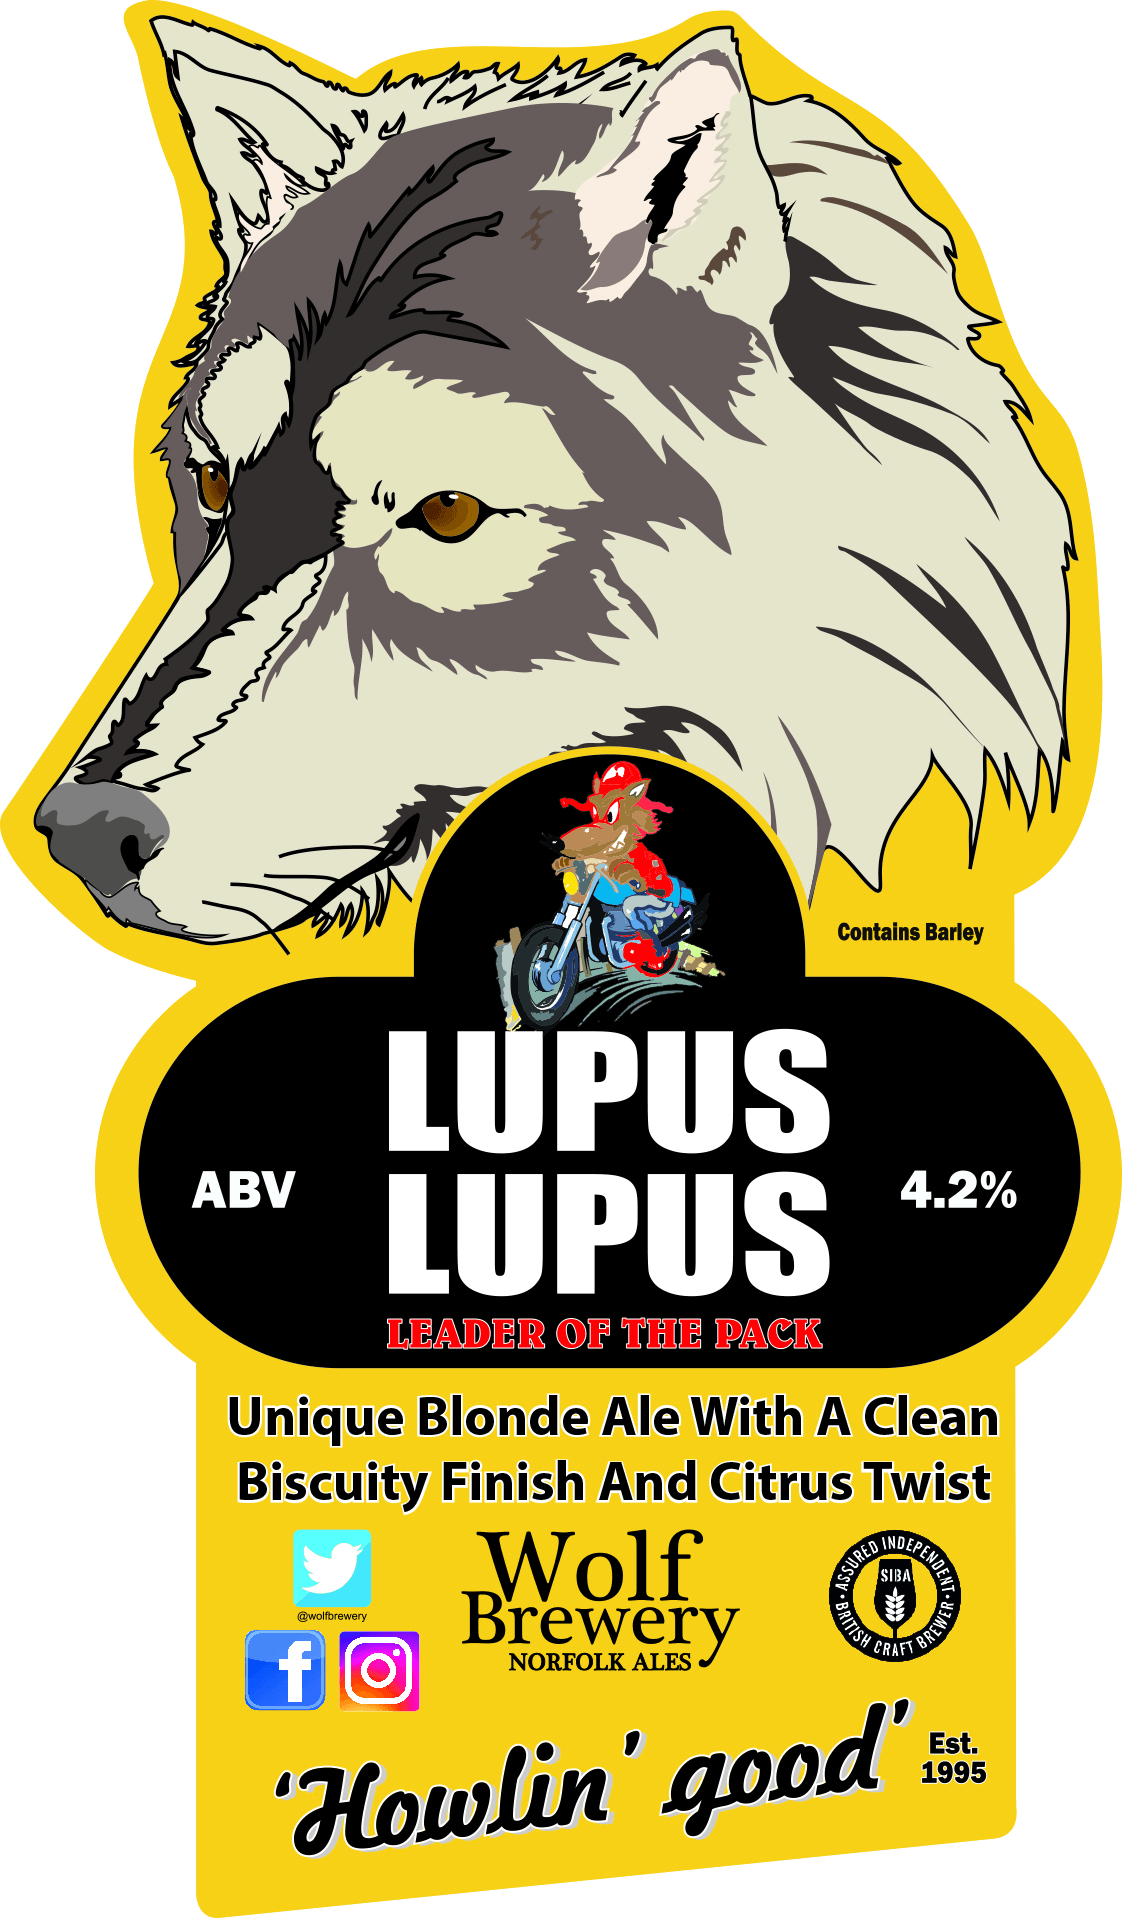 Lupus Lups beer